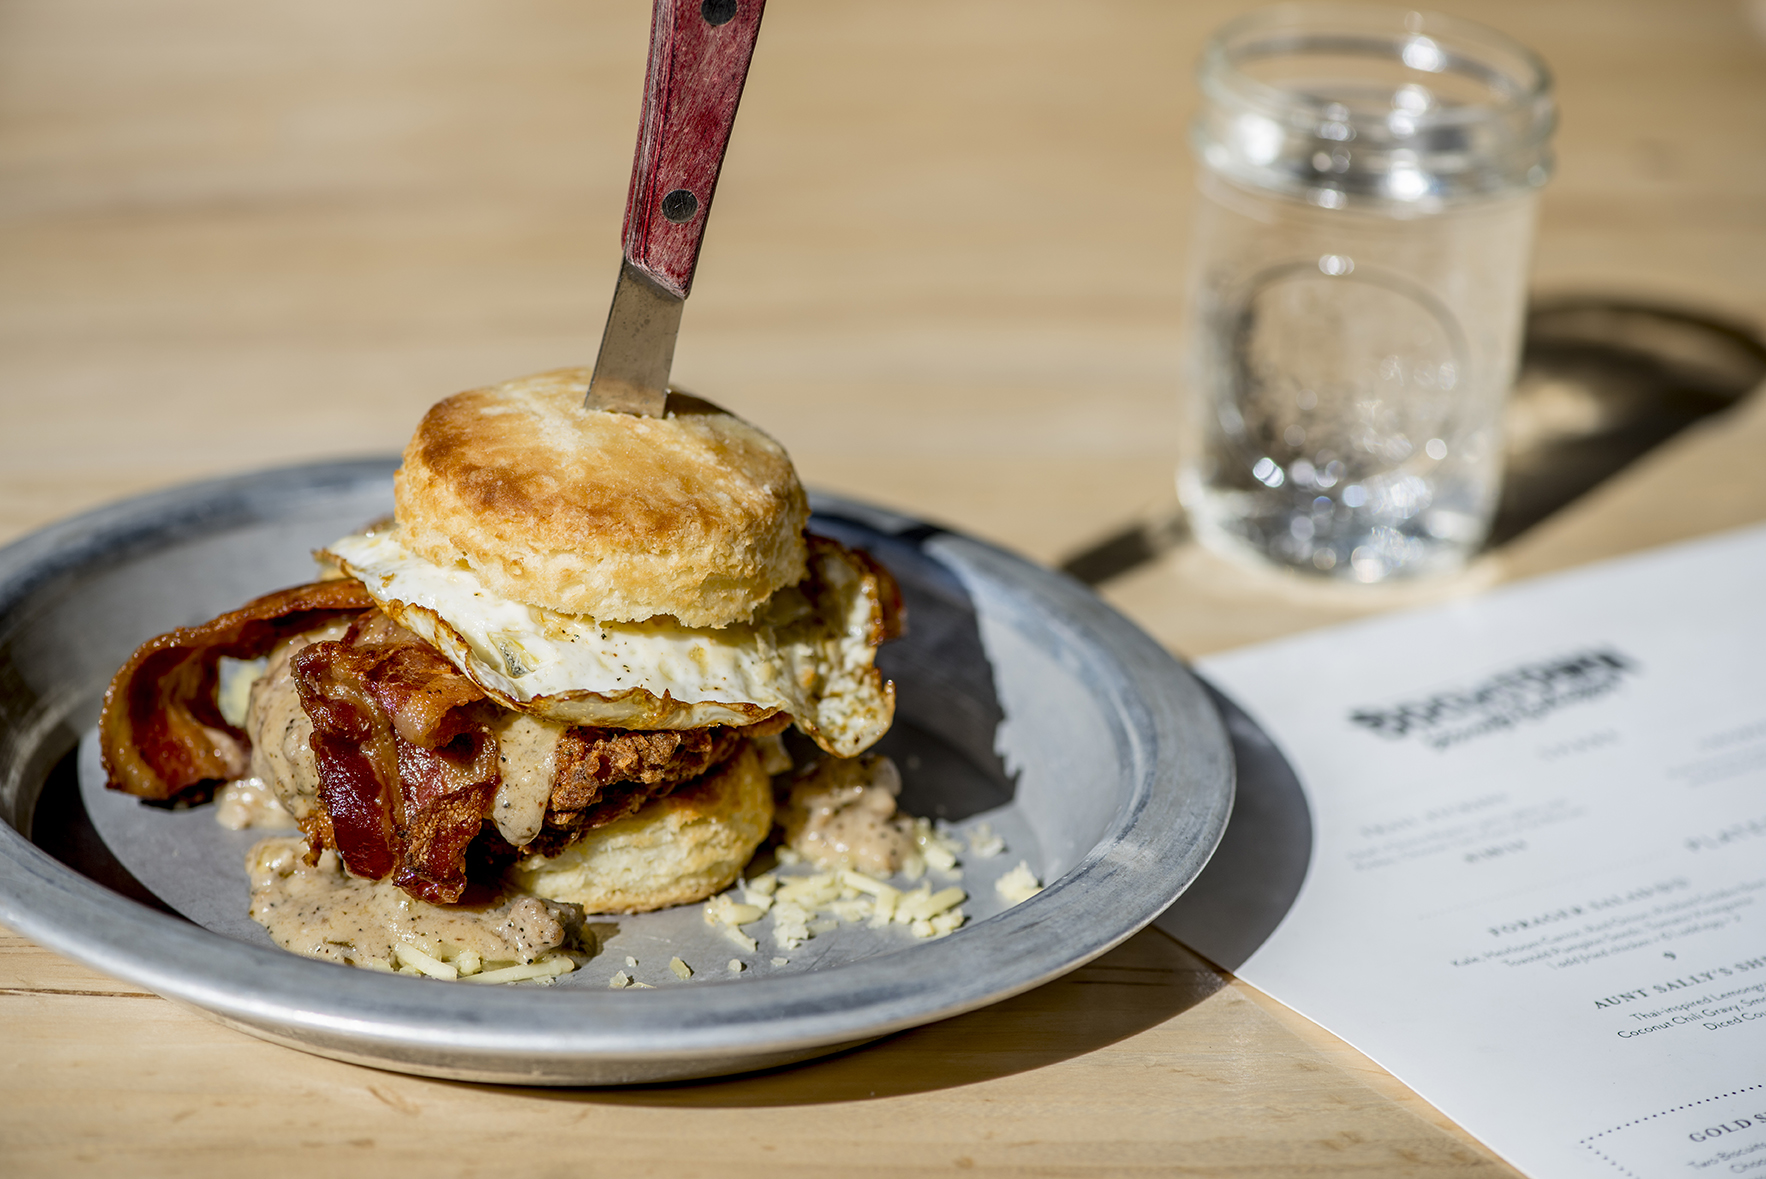  A favorite at  Boomtown Biscuits &amp; Whiskey . The Yukon - Fried Chicken, Sawmill Gravy, Smoked Cheddar, Bacon and Egg add-on. || Image:  Twin Spire Photography  - Published: 10.9.2019 